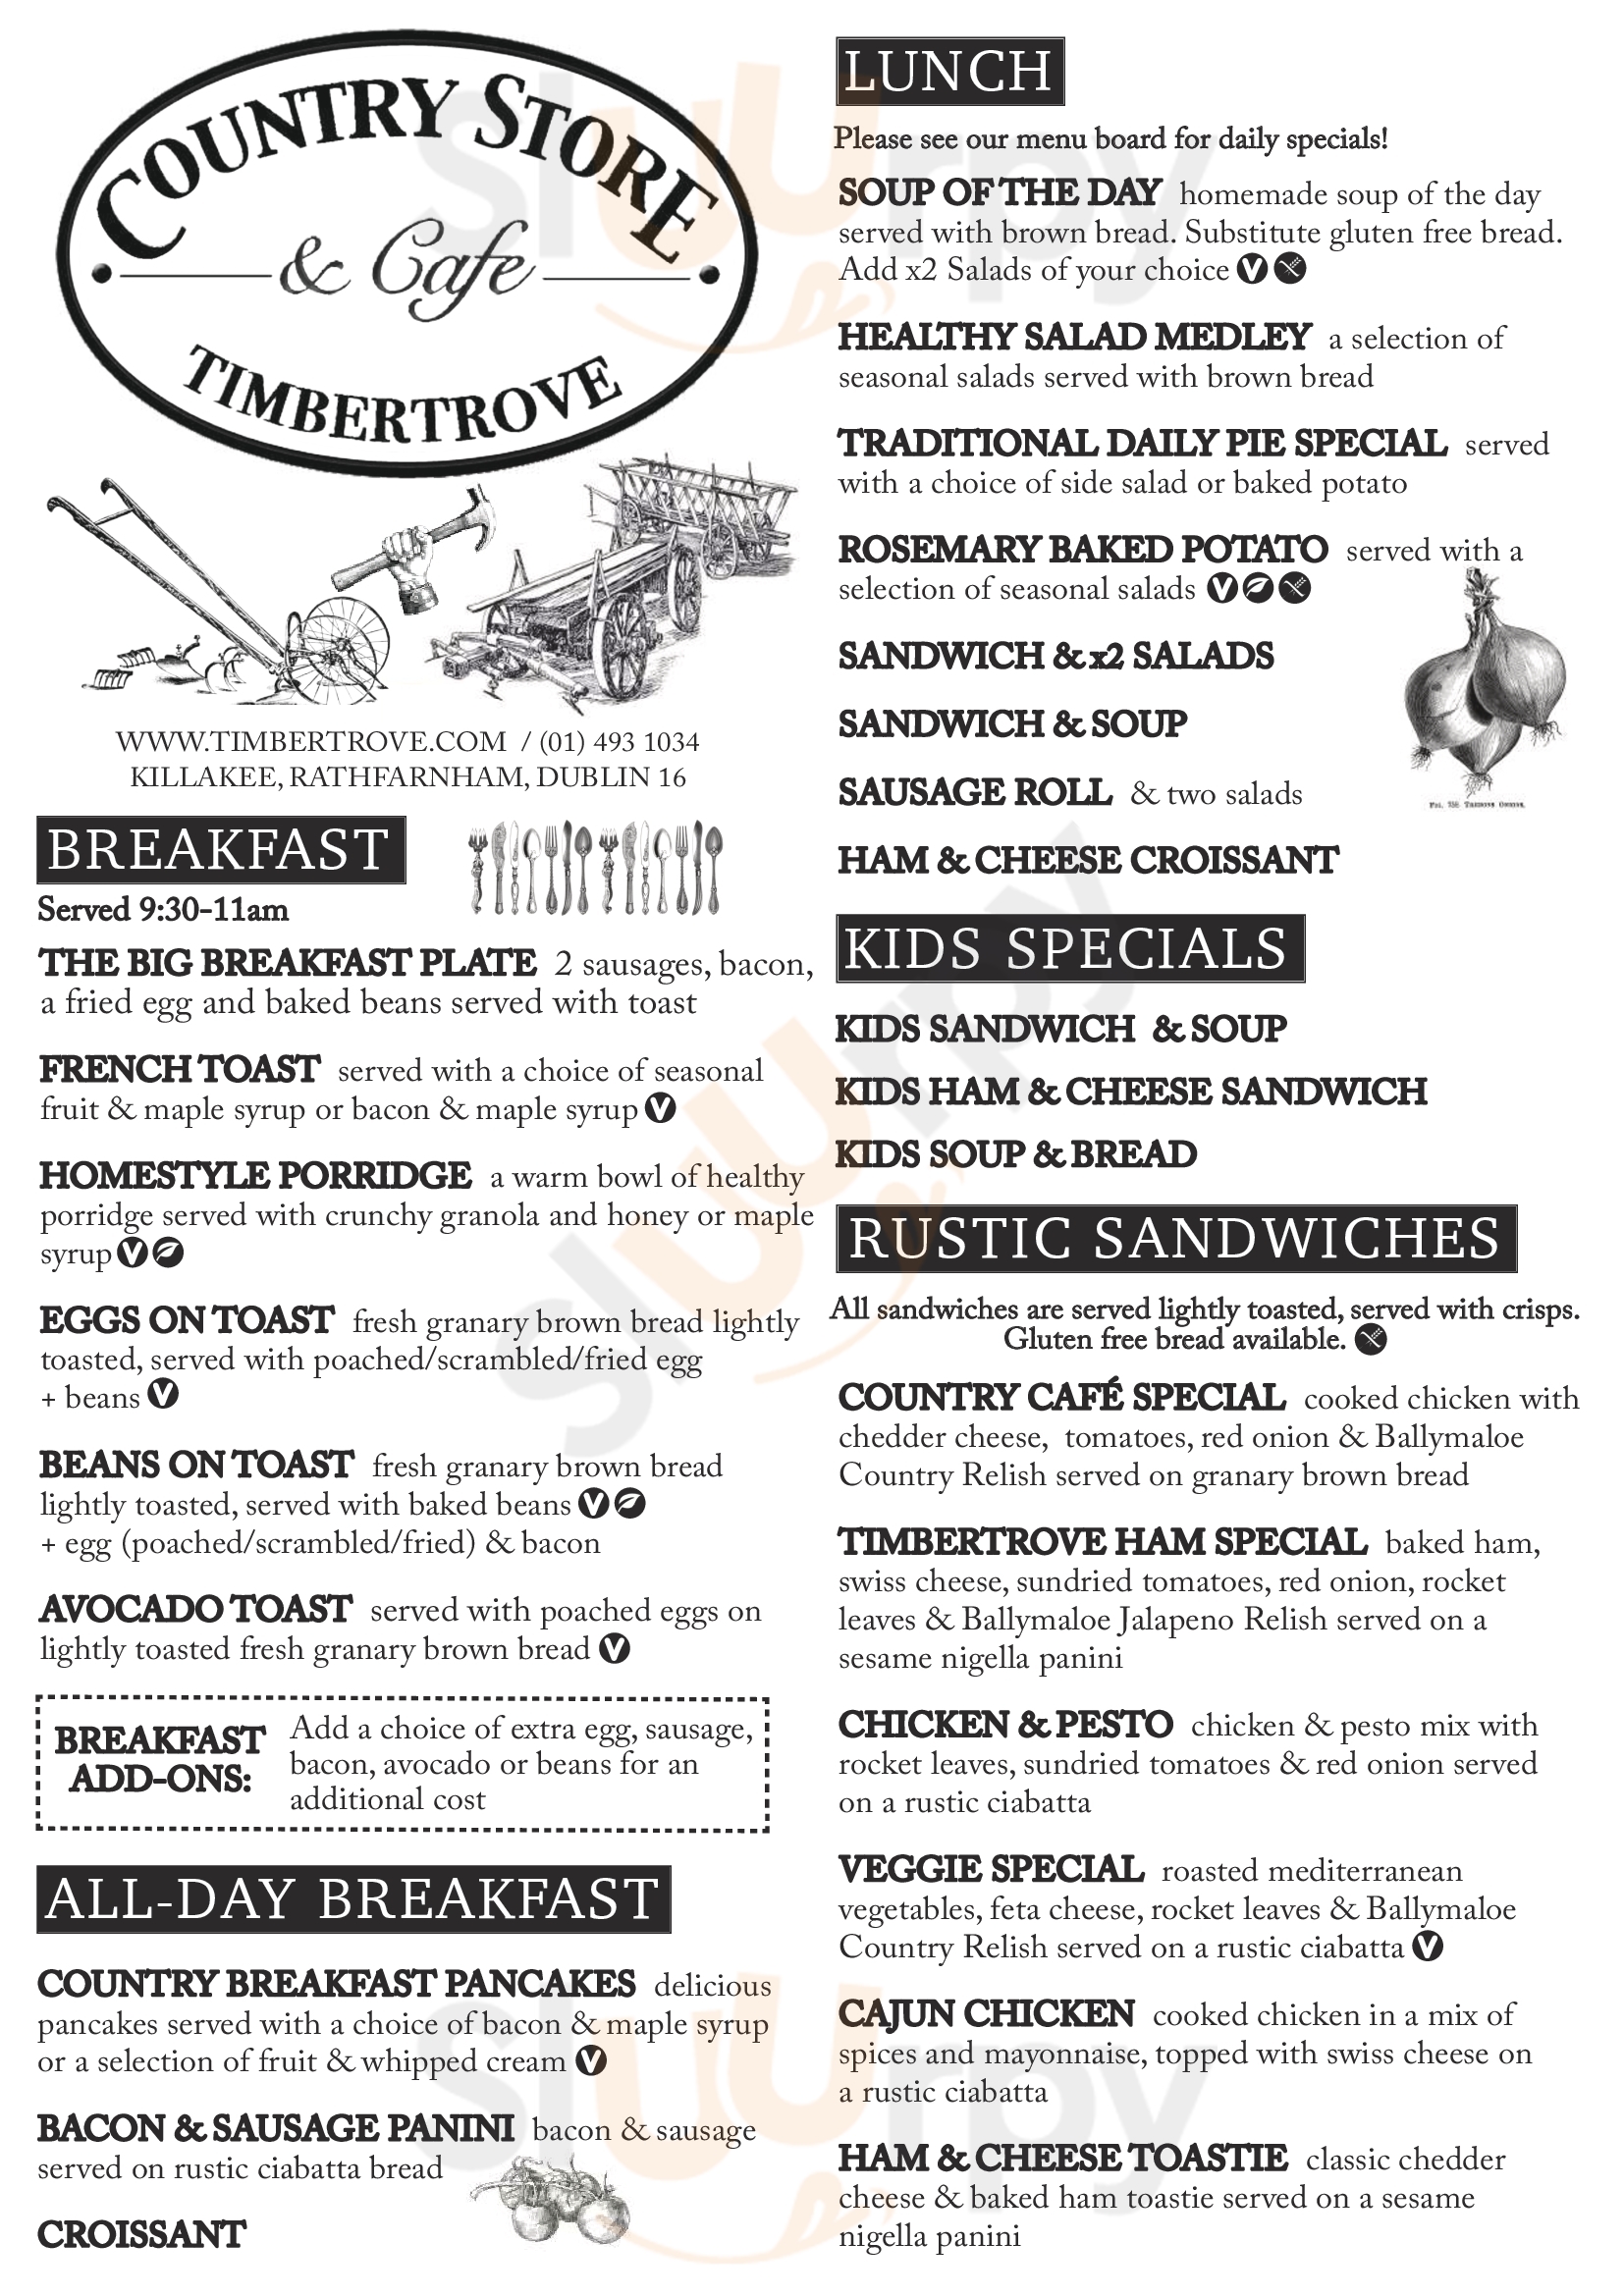 Country Store & Cafe Timbertrove Dublin Menu - 1